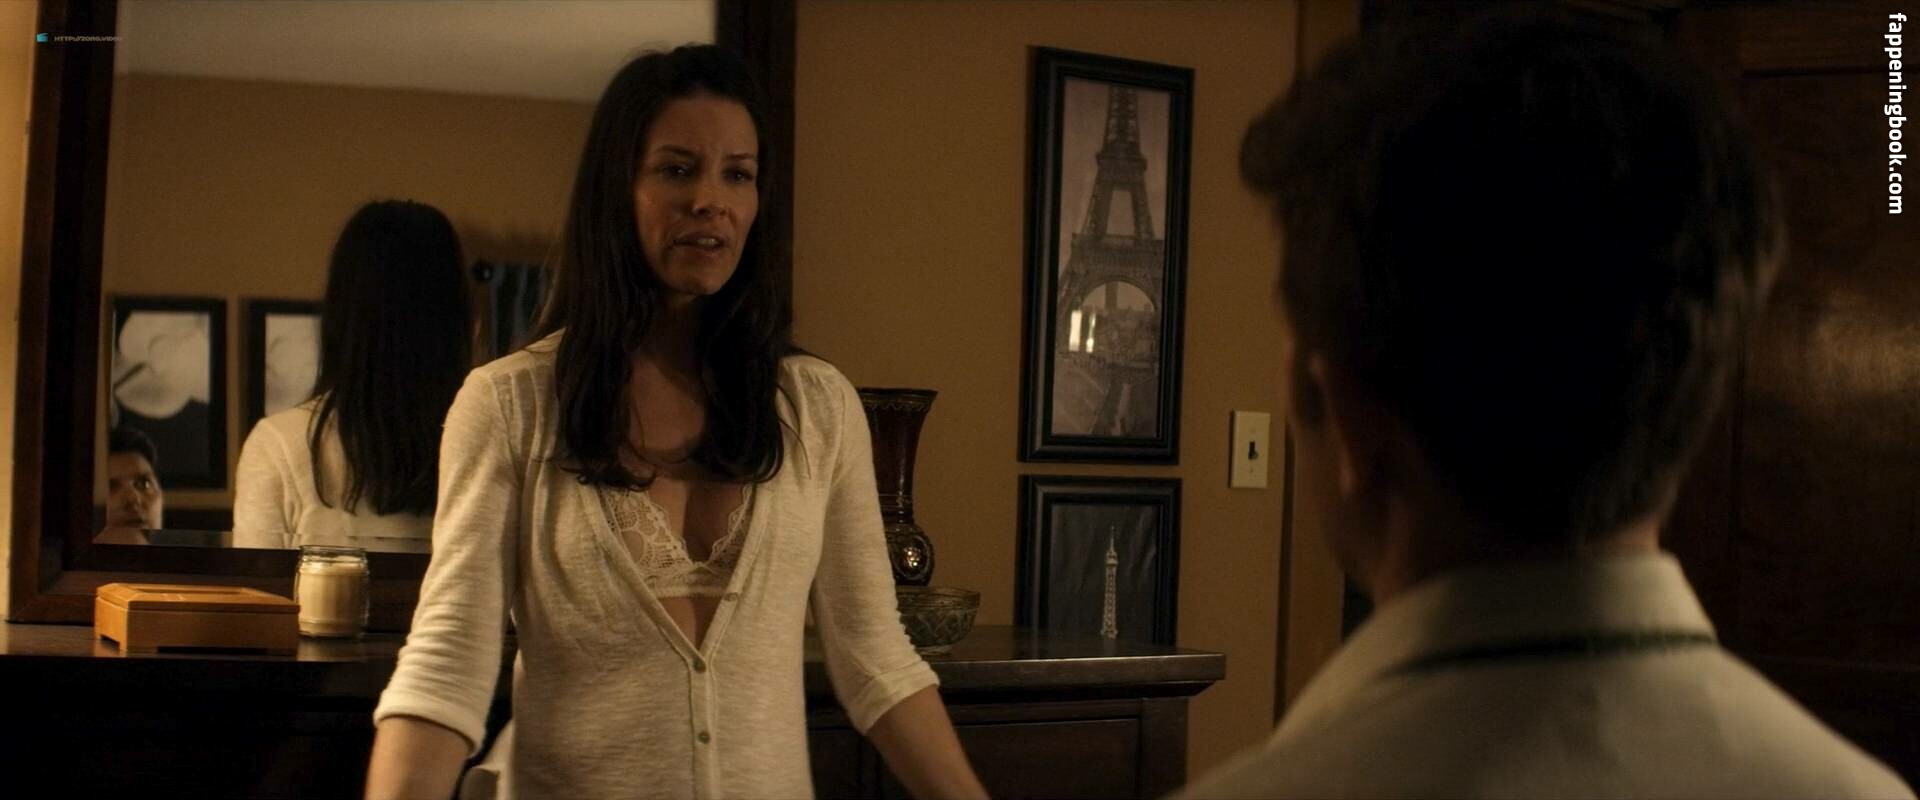 Evangeline Lilly Nude